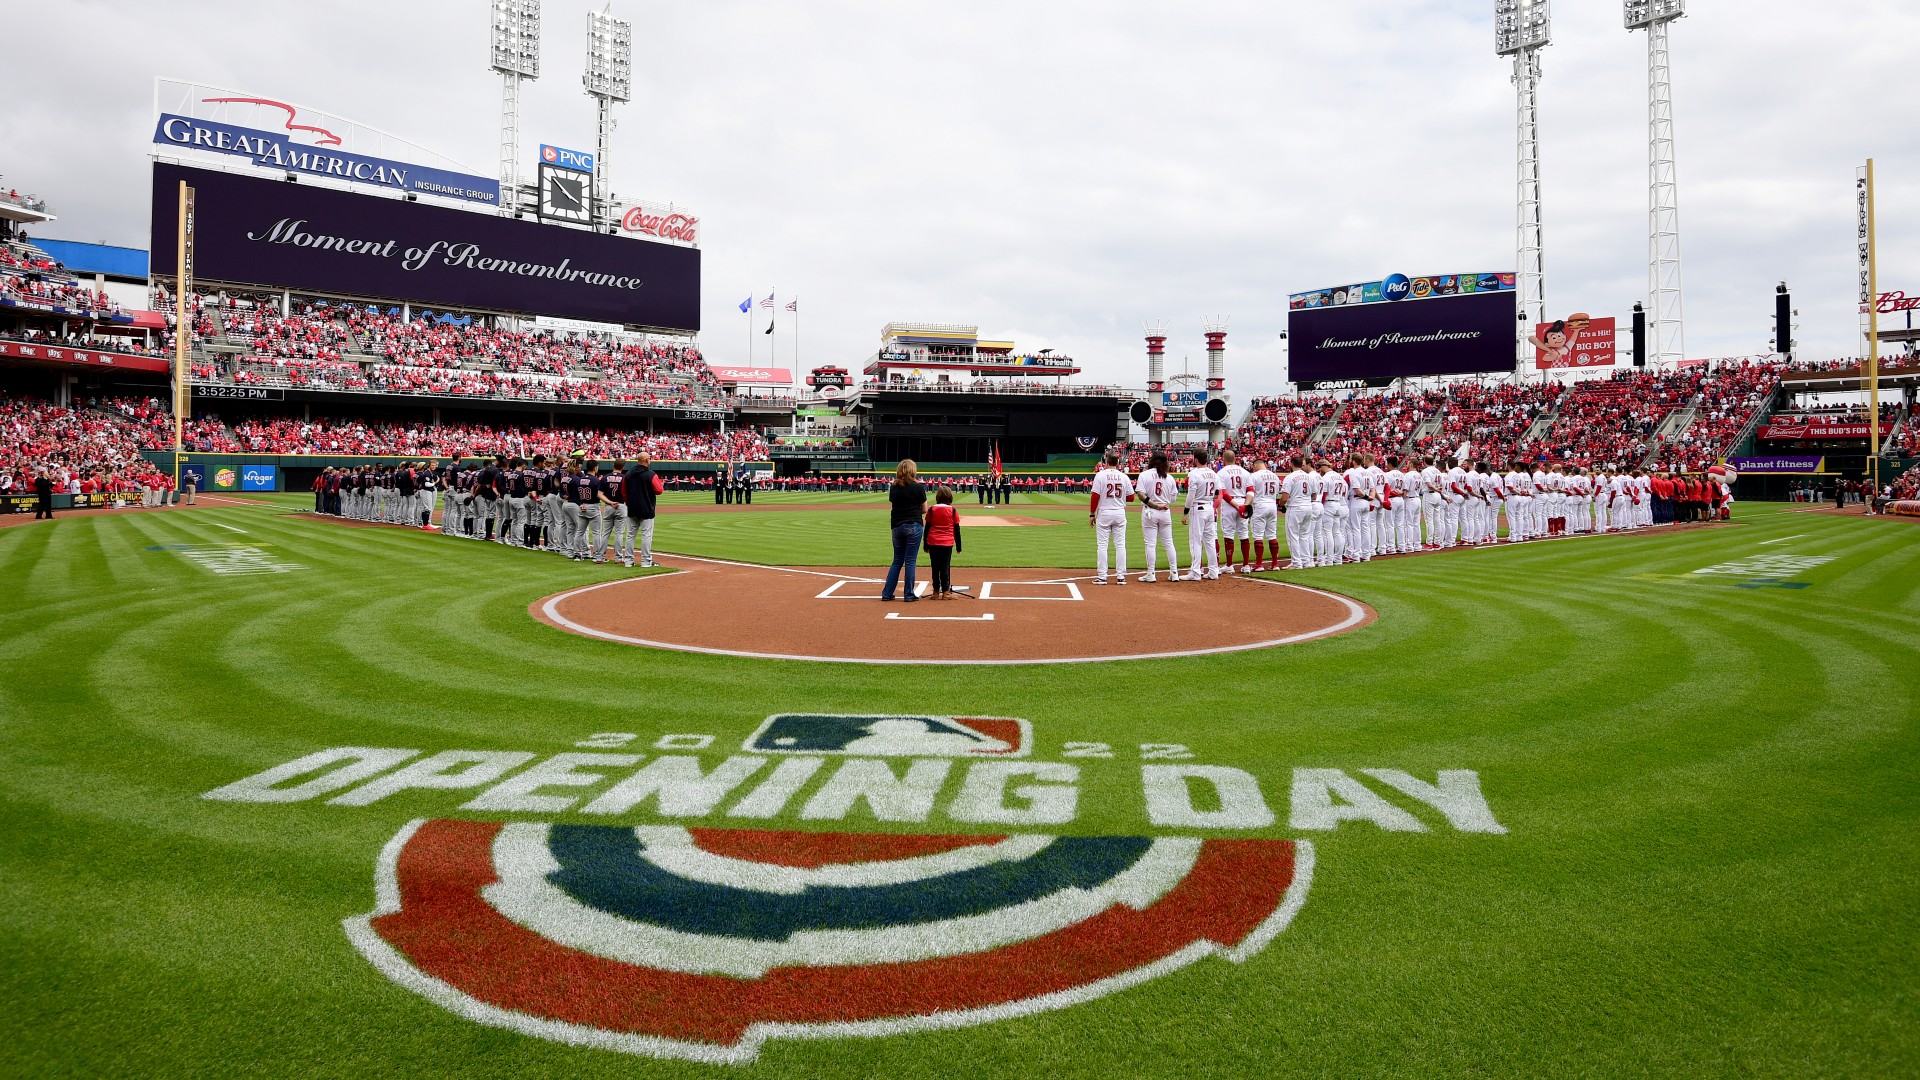 What are the key dates for the 2023 MLB season? From Opening Day to World Series